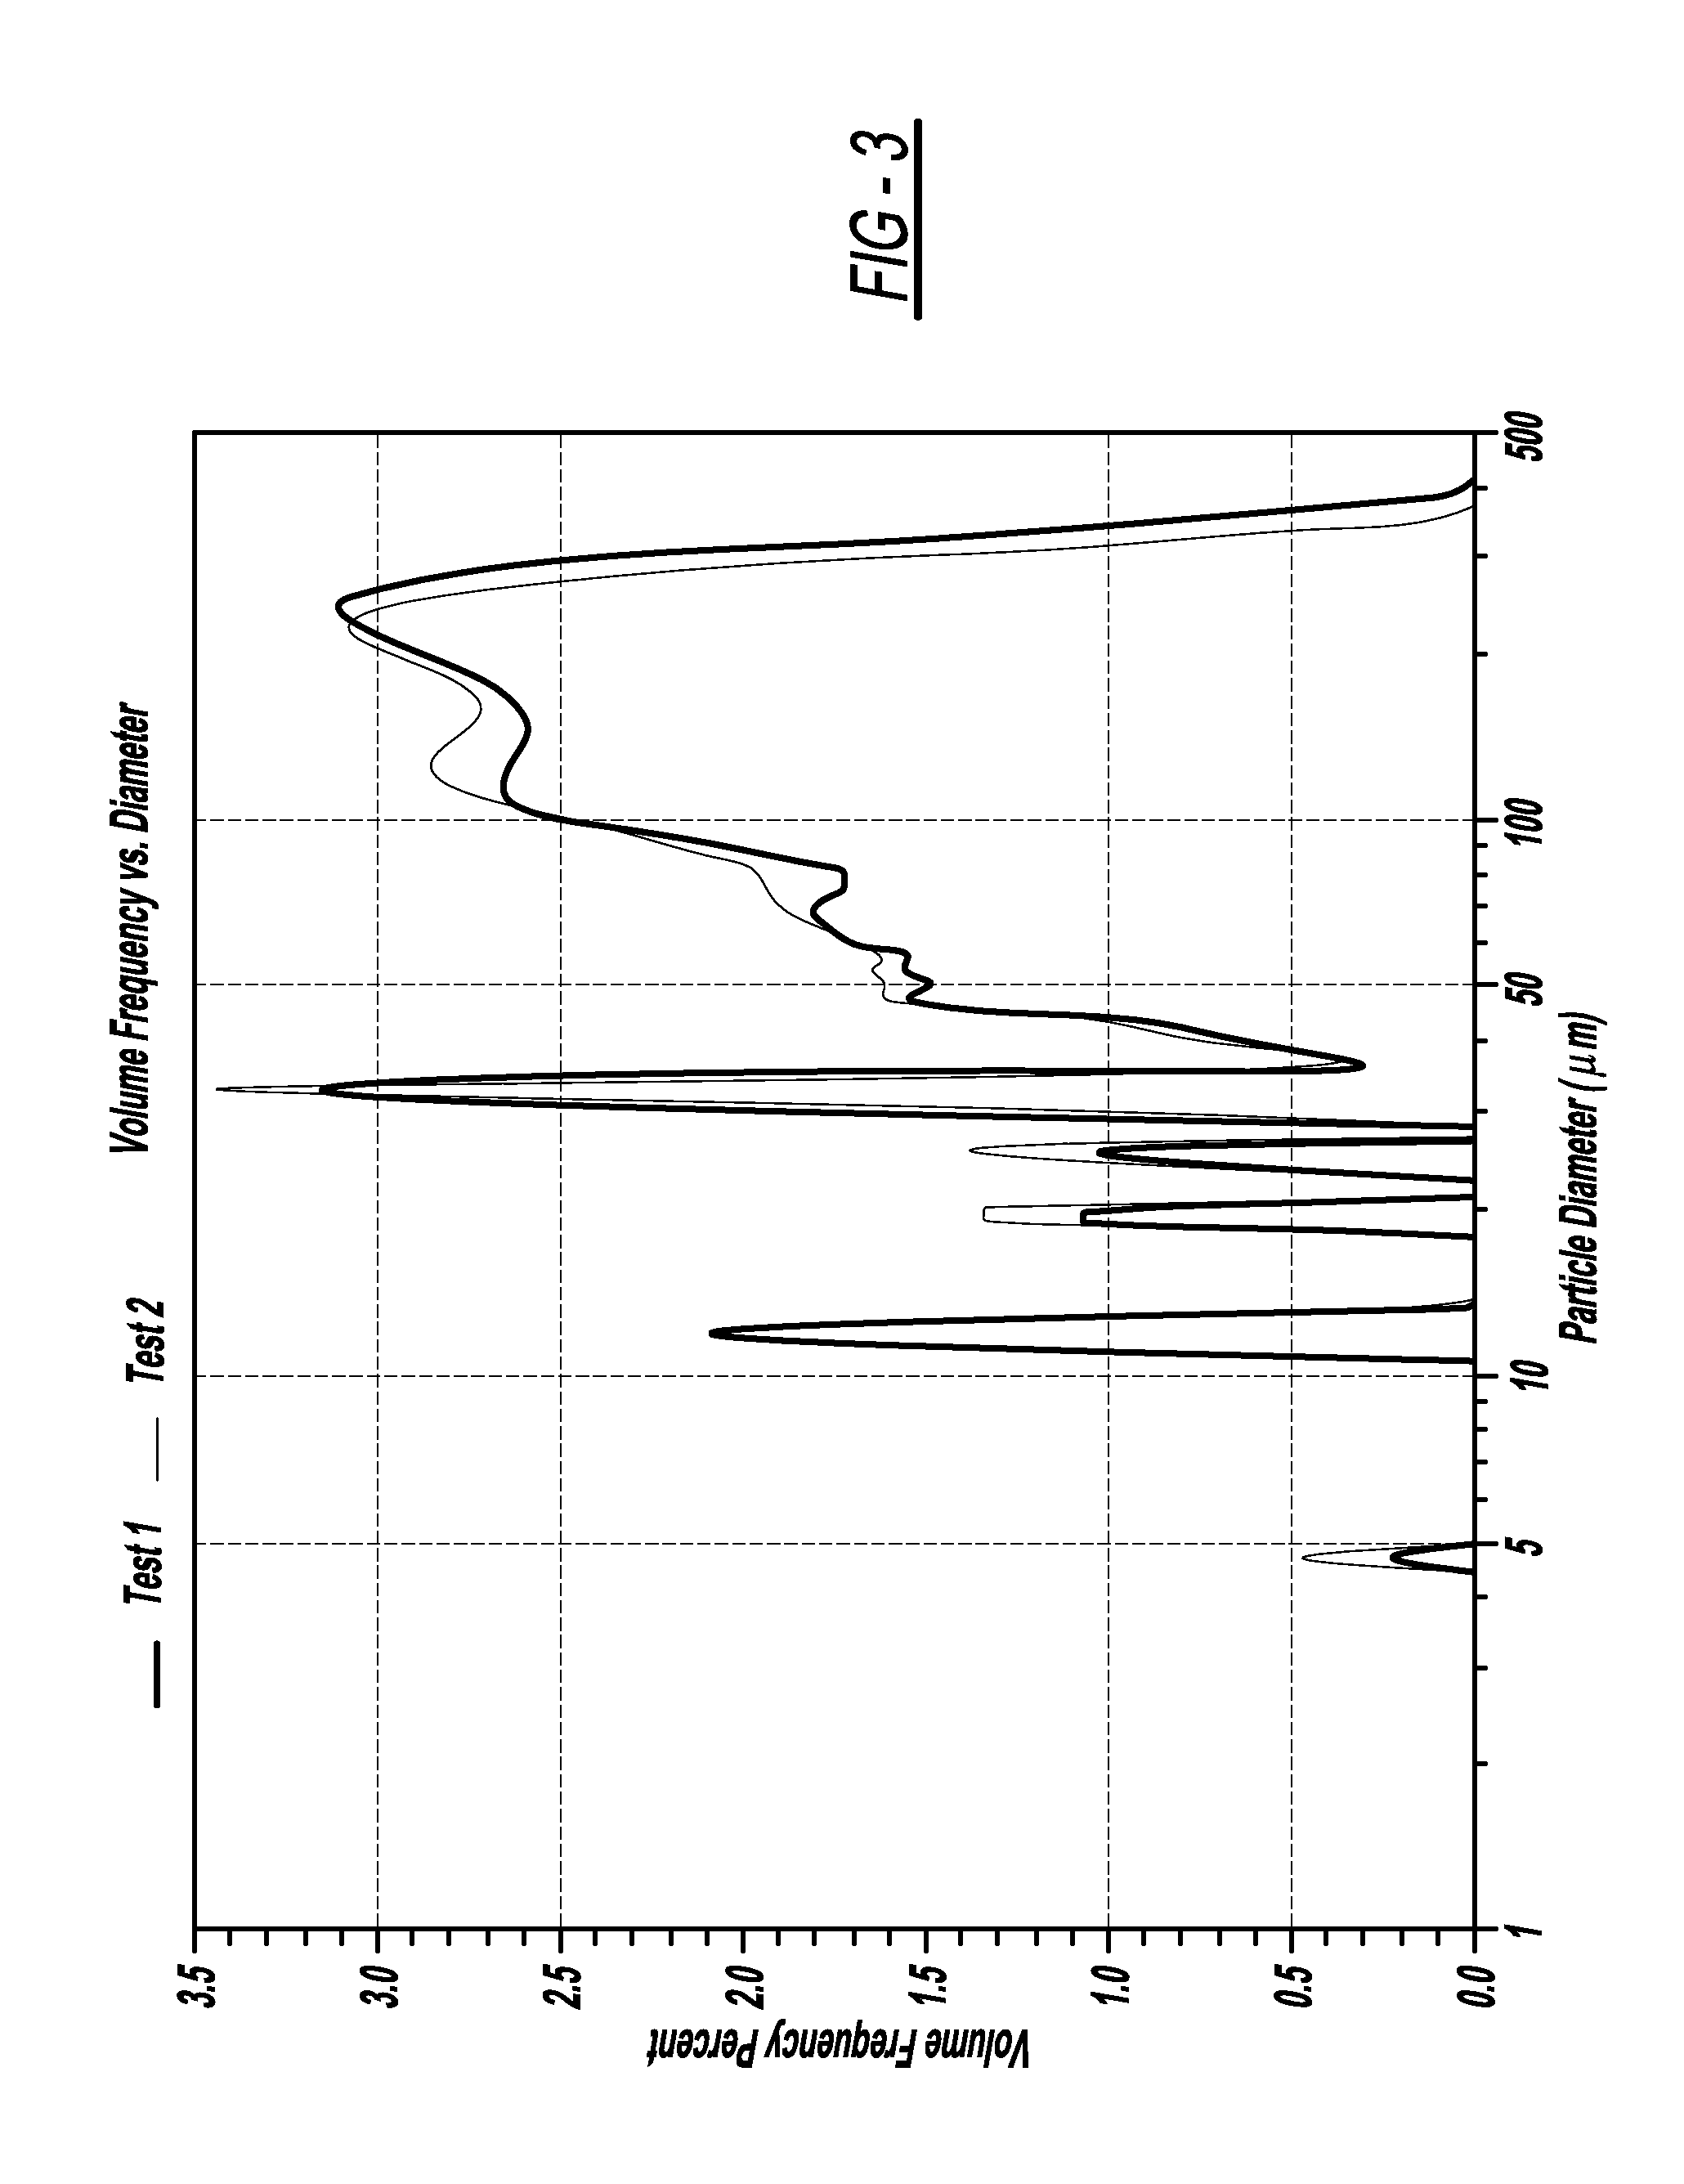 Method of making structural members using waste and recycled plastics